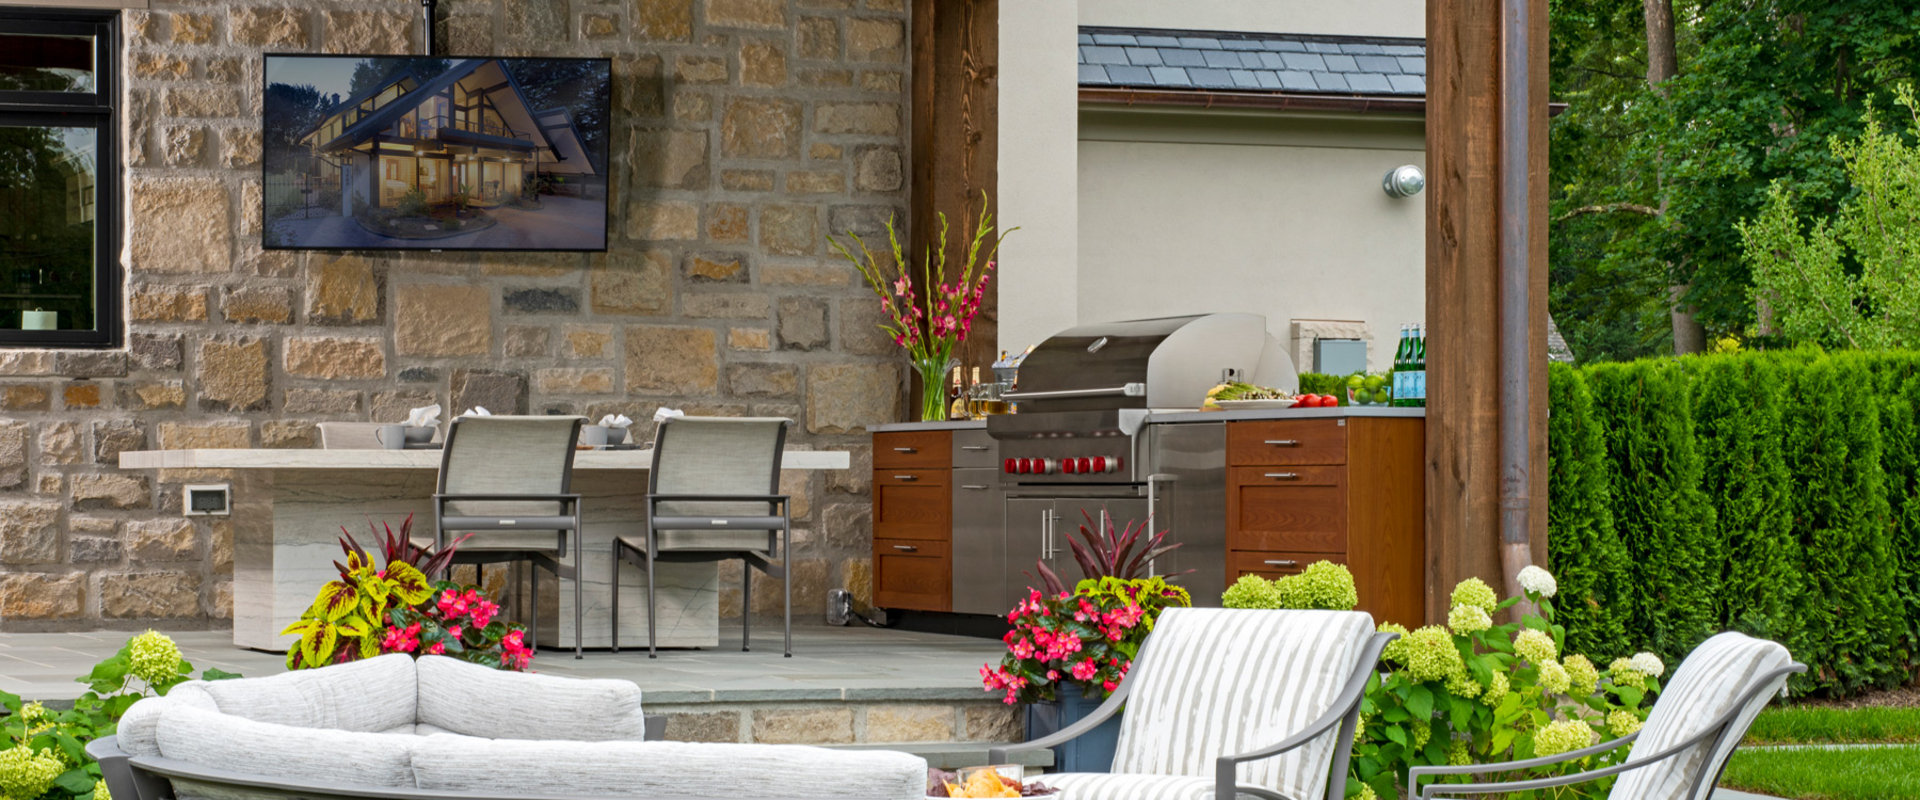 Choosing Appliances and Materials for Outdoor Living Spaces